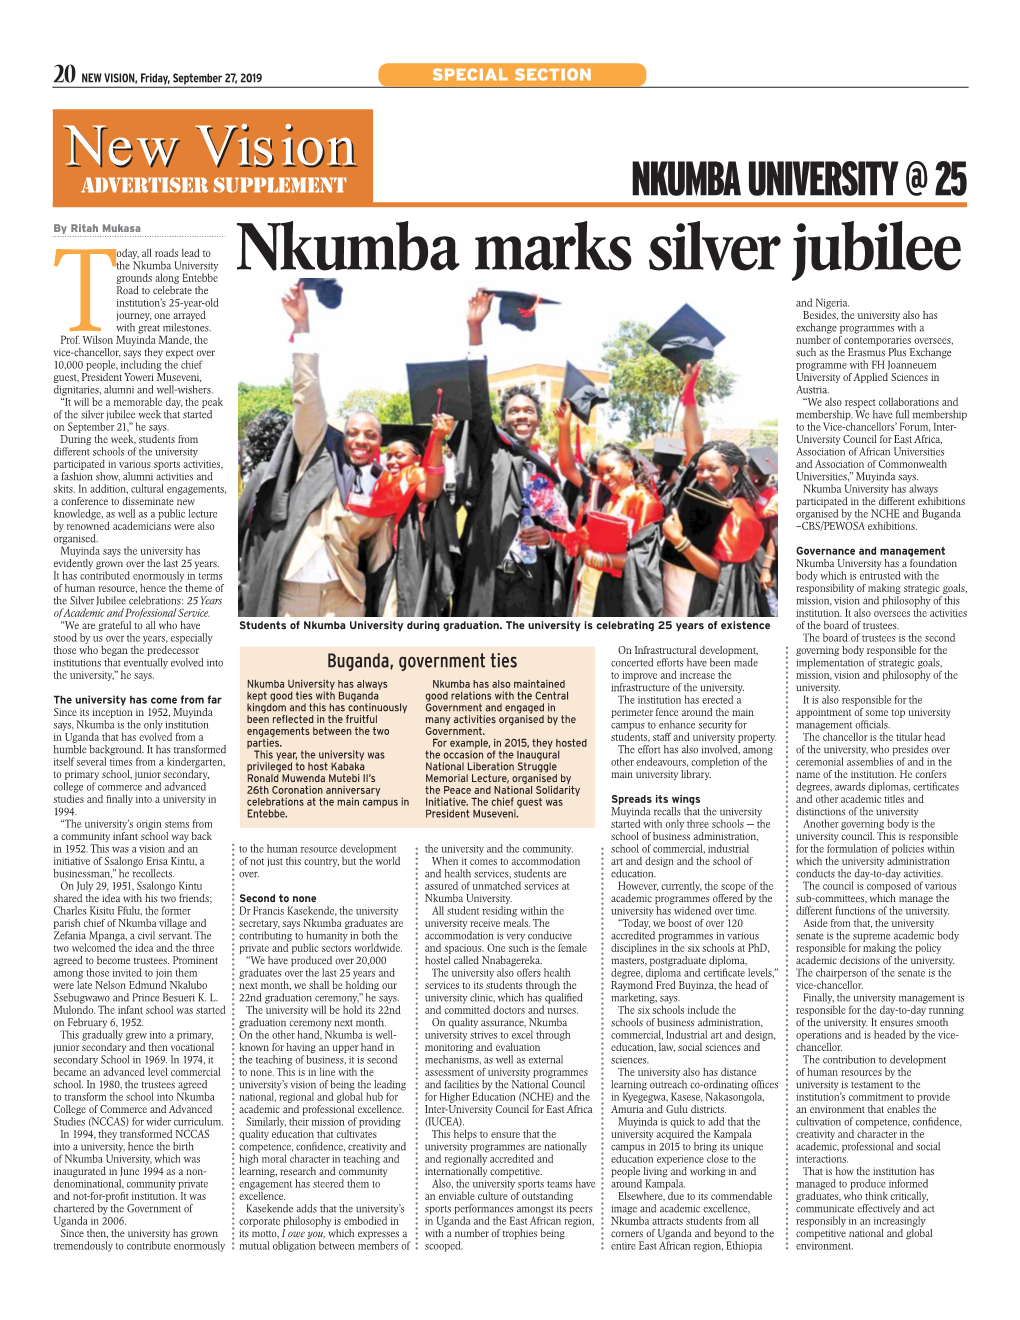 Nkumba Marks Silver Jubilee the Nkumba University Grounds Along Entebbe Road to Celebrate the Institution’S 25-Year-Old and Nigeria